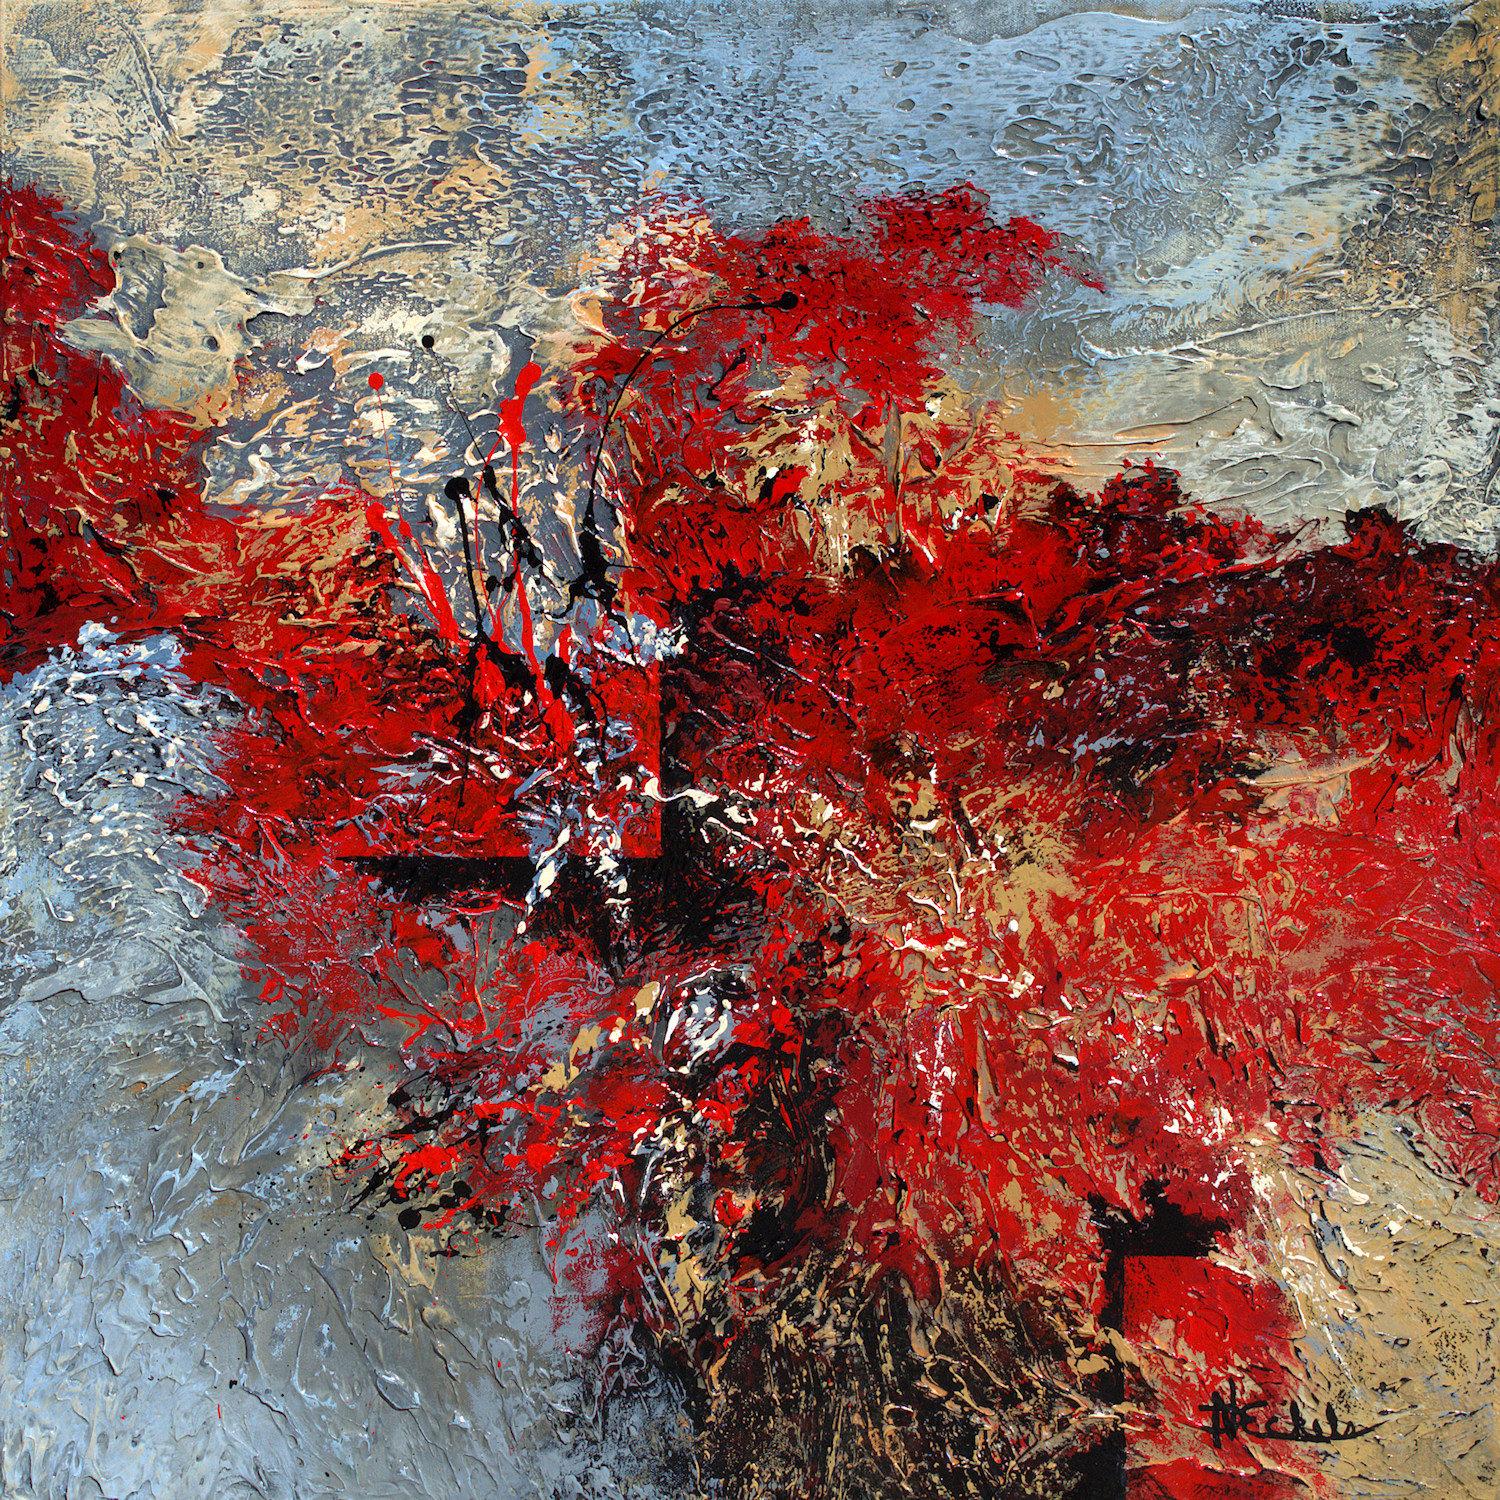 Nancy Eckels Abstract Painting - "Cool and Crimson" Mixed Media abstract with textural reds, blues, tans, 